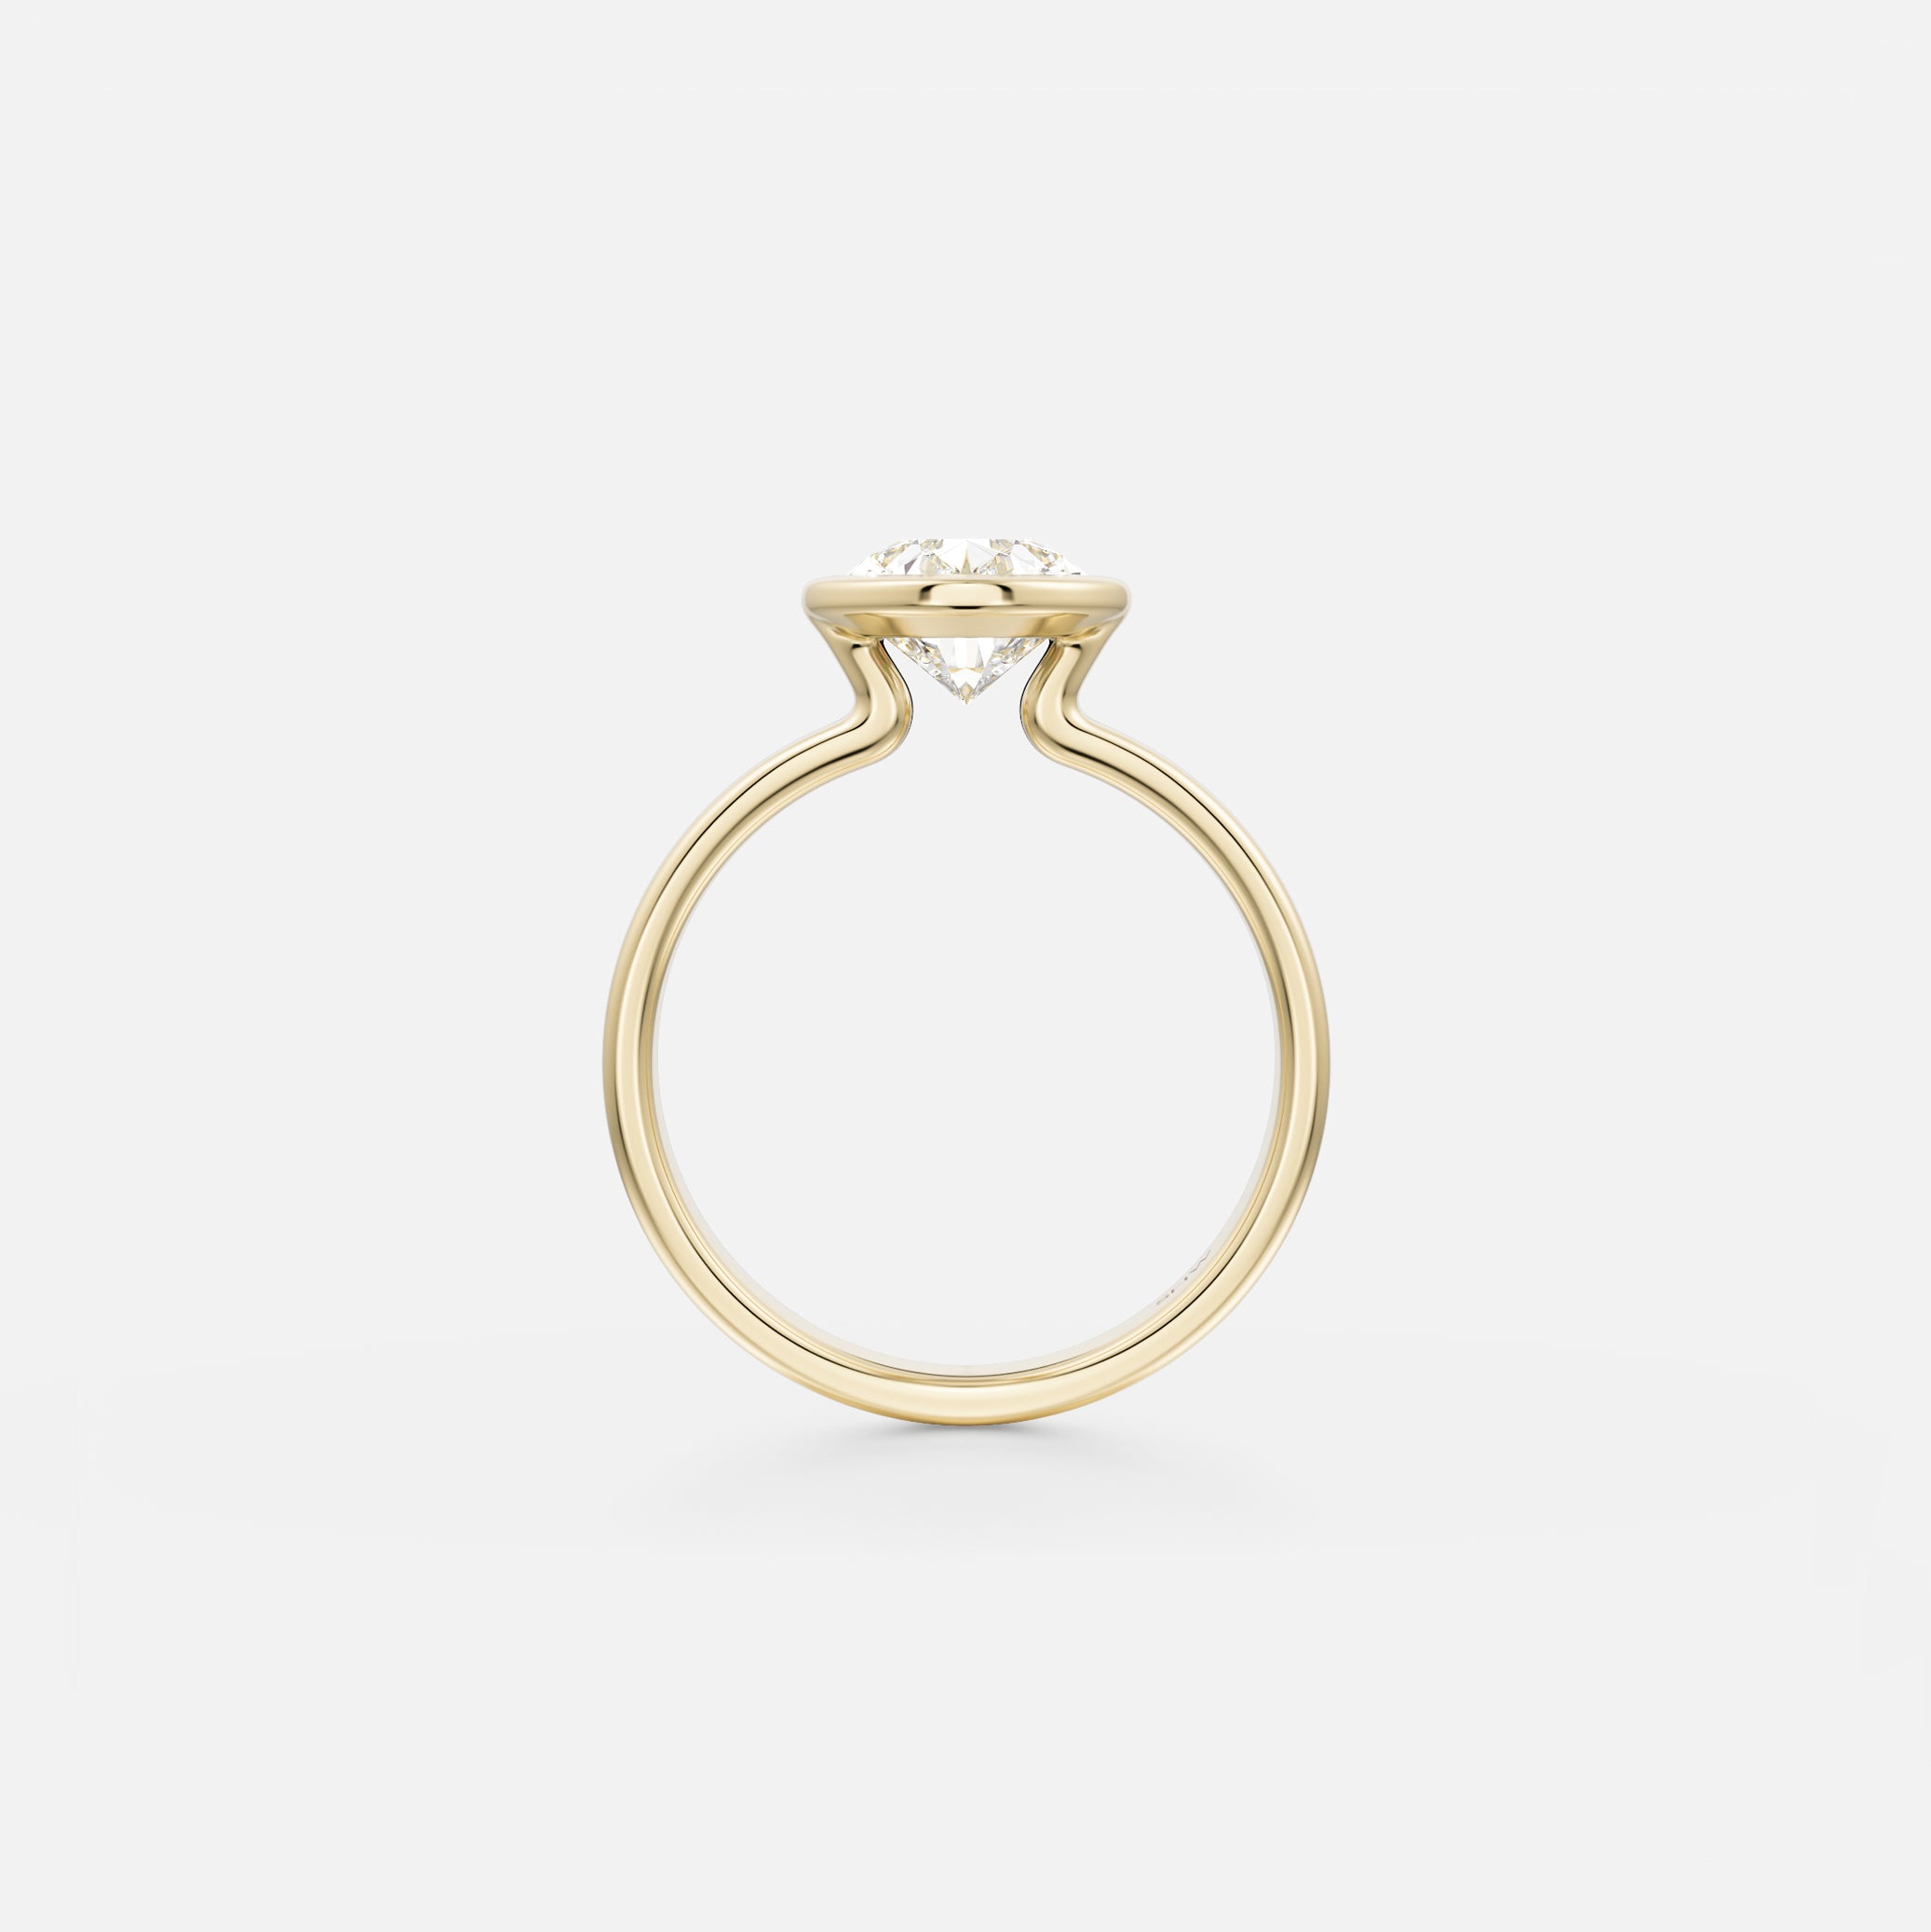 Badi Flat Sculptural Wide Large Band with North South Pear Cut Profile Bezel Set Unique Engagement Ring Setting in recycled 14k Gold or platinum by SHW Fine Jewelry NYC